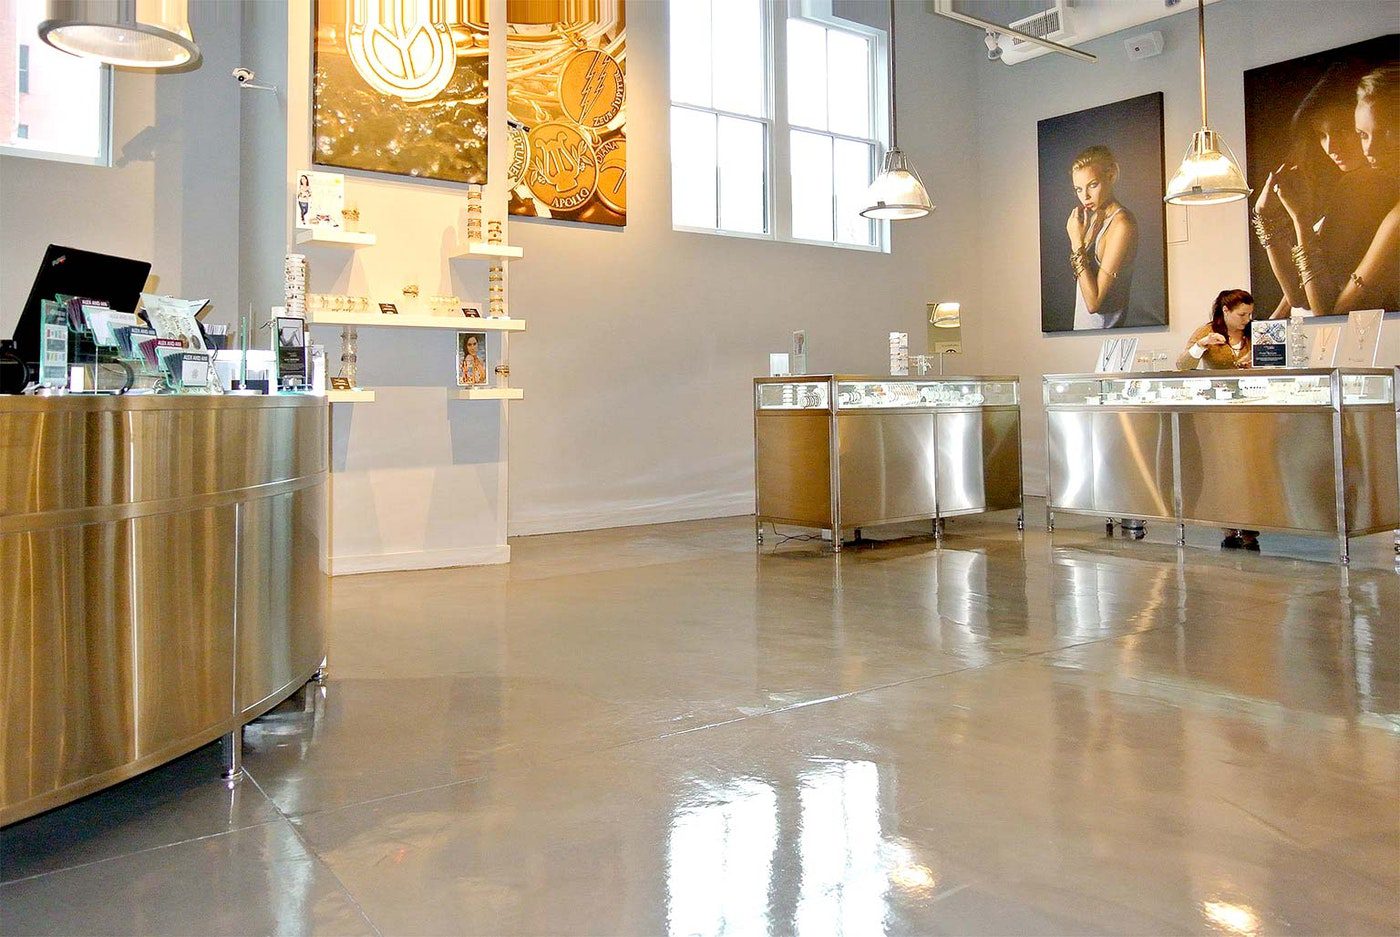 A detailed close-up of a glossy polished concrete floor featuring intricate patterns in shades of gray and white.